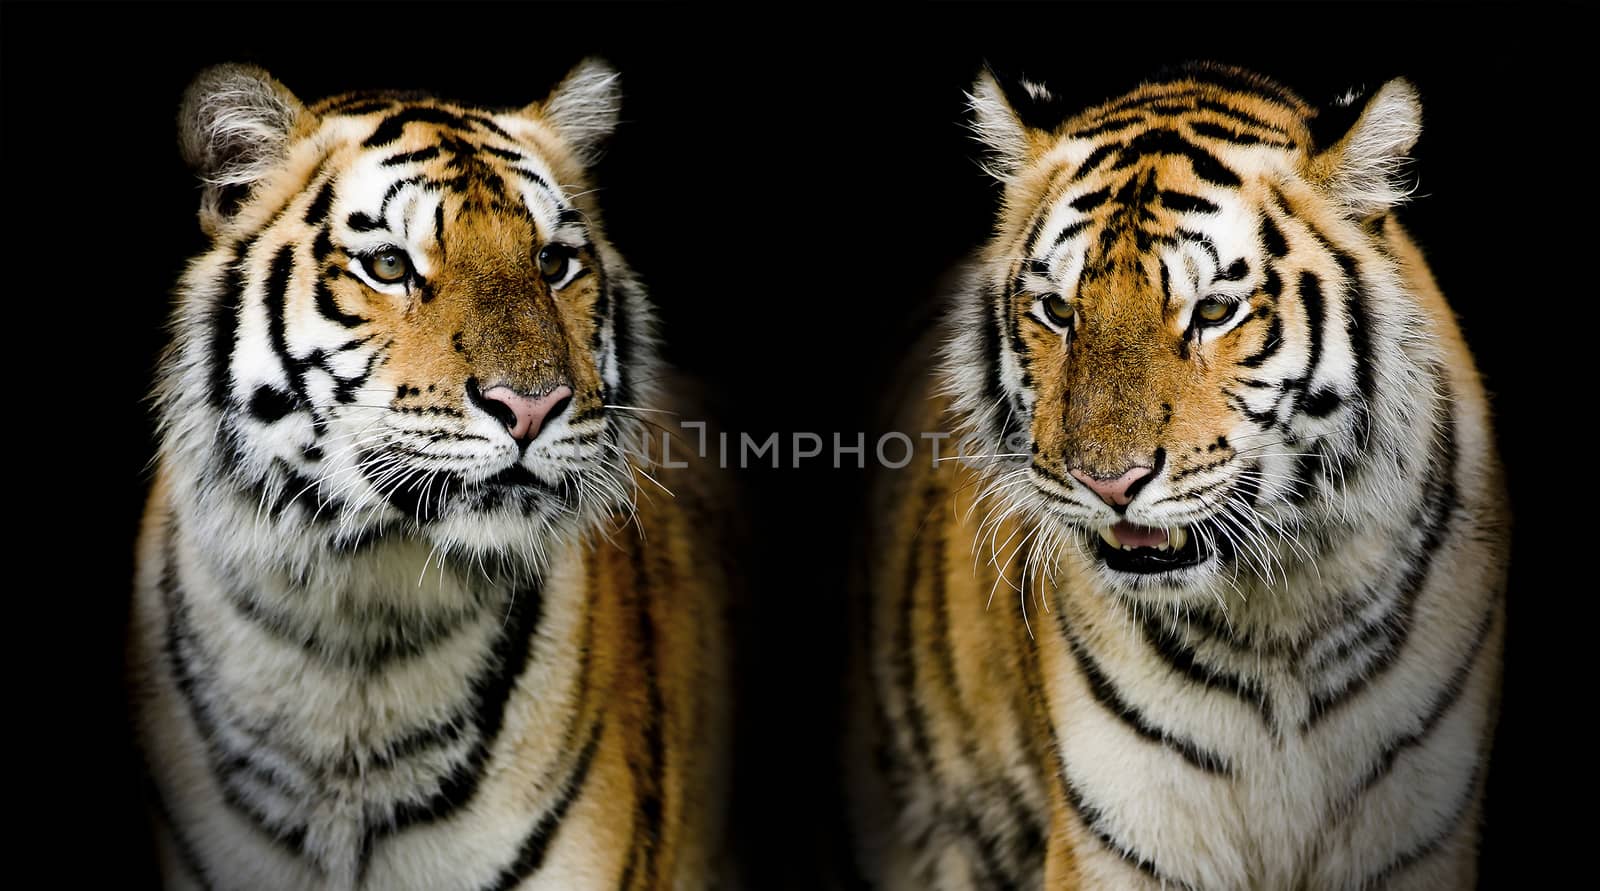 Twin tigerr. (And you could find more animals in my portfolio.) by art9858